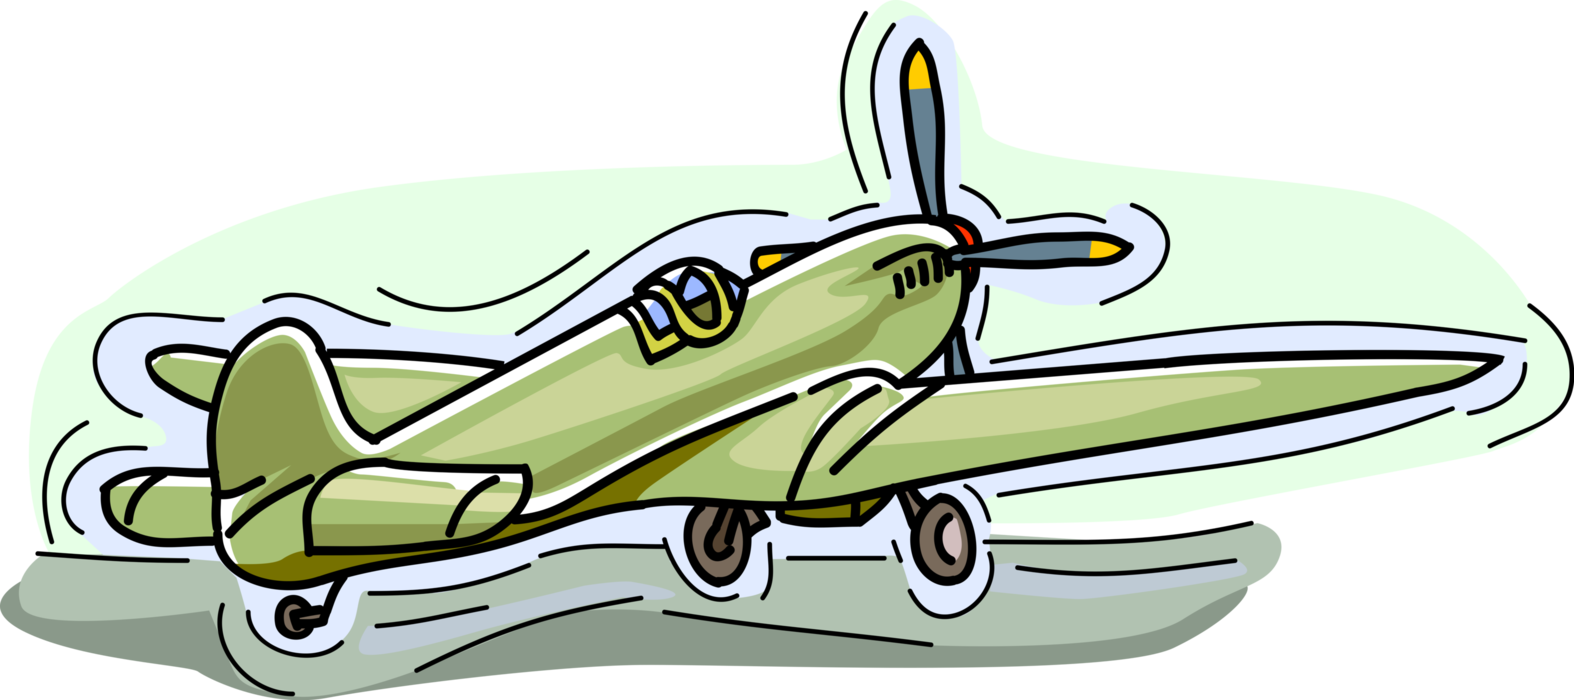 Vector Illustration of Fixed-Wing Propeller Aircraft Airplane Takes Off from Airport Runway